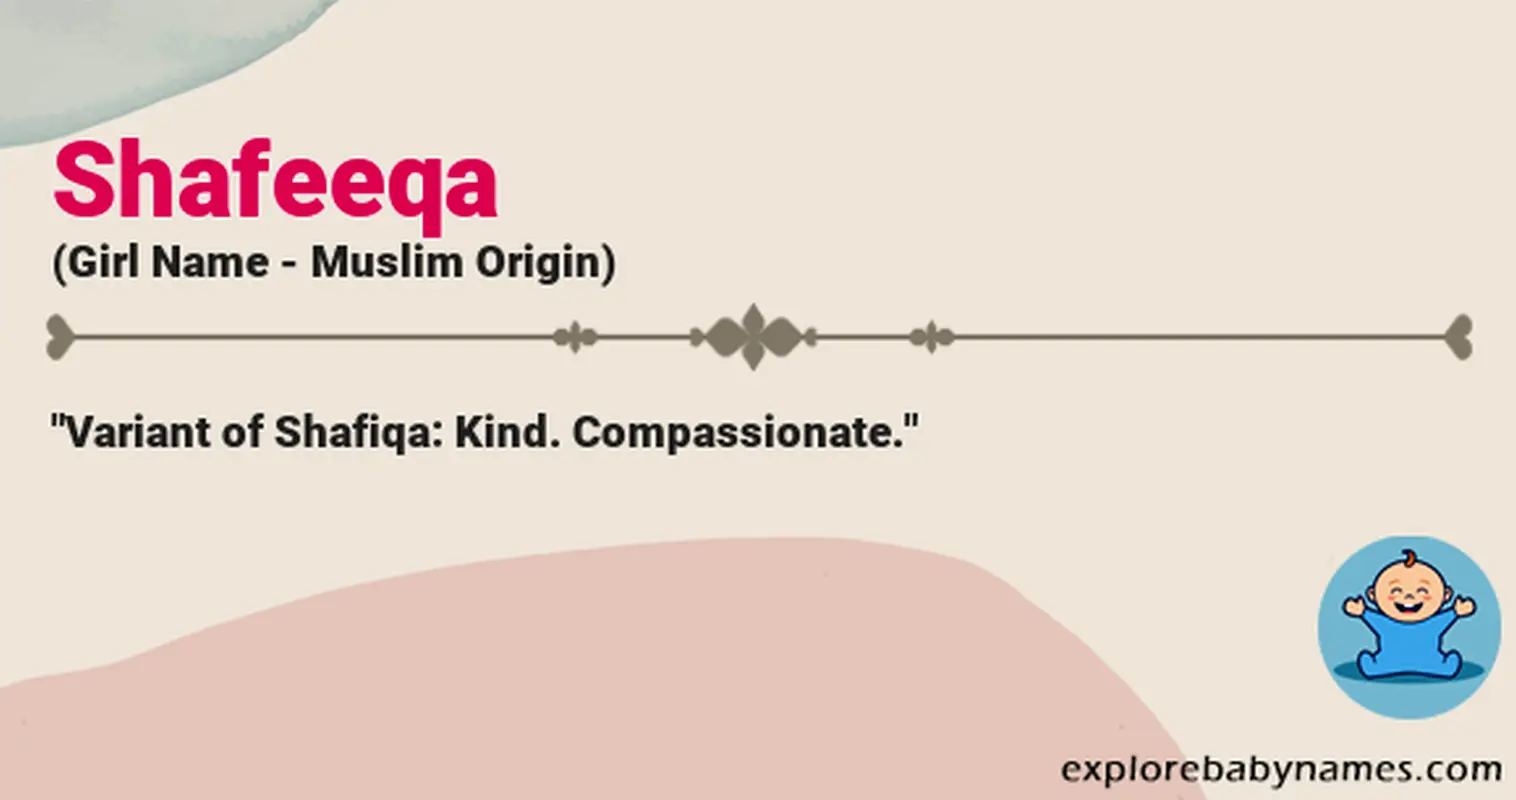 Meaning of Shafeeqa